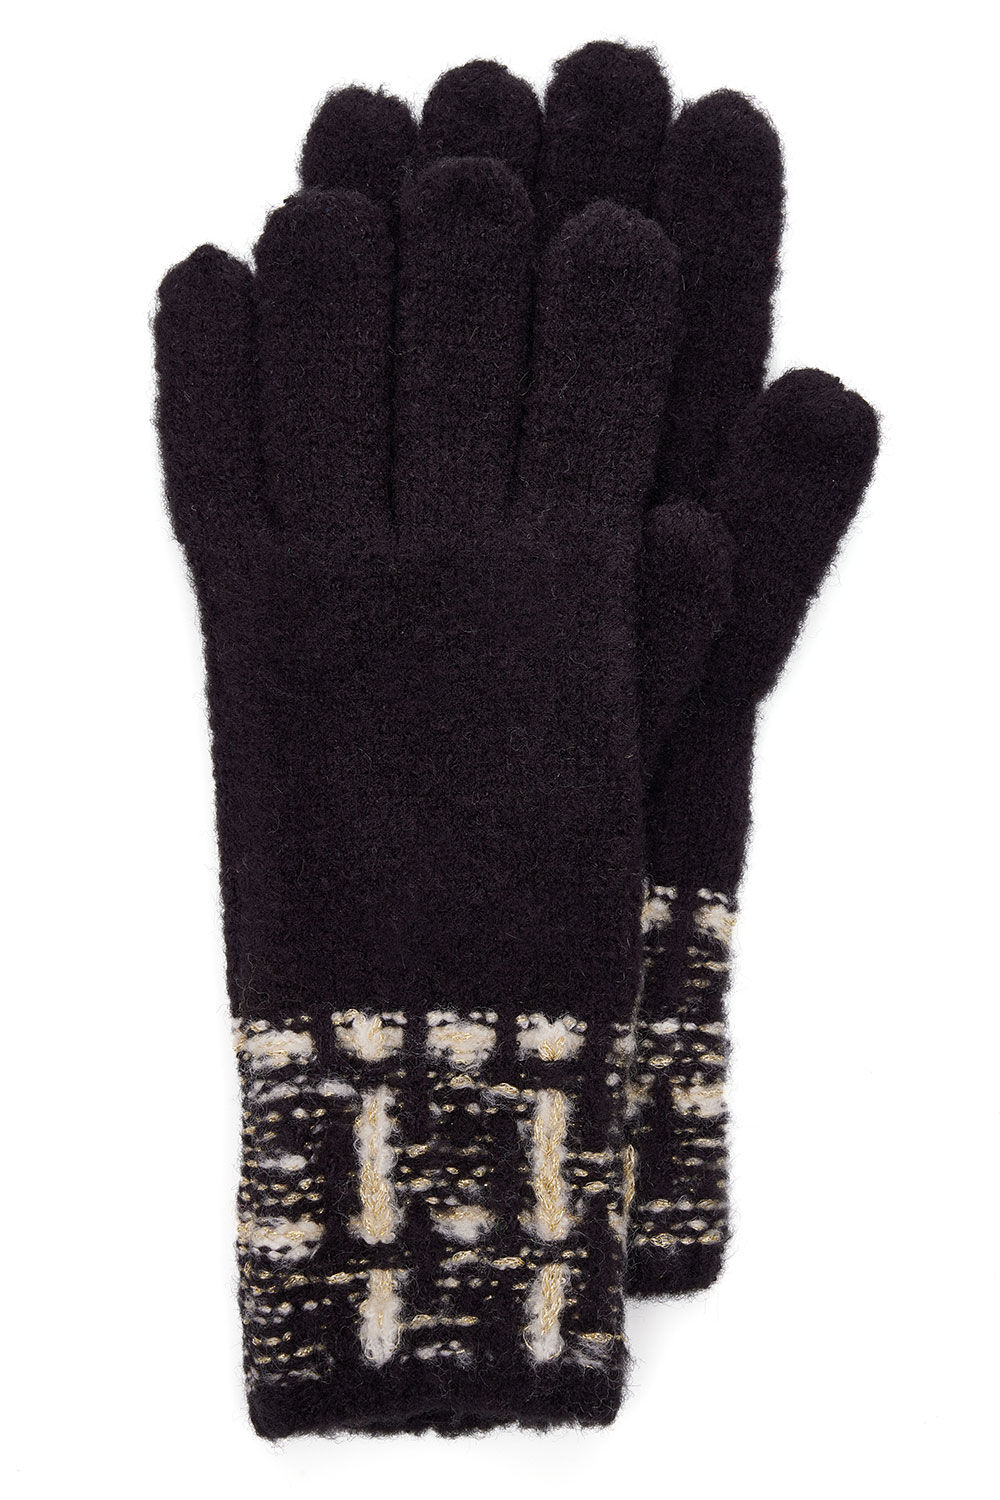 Bonmarche Black and Gold Lurex Check Knitted Gloves, Size: One Size